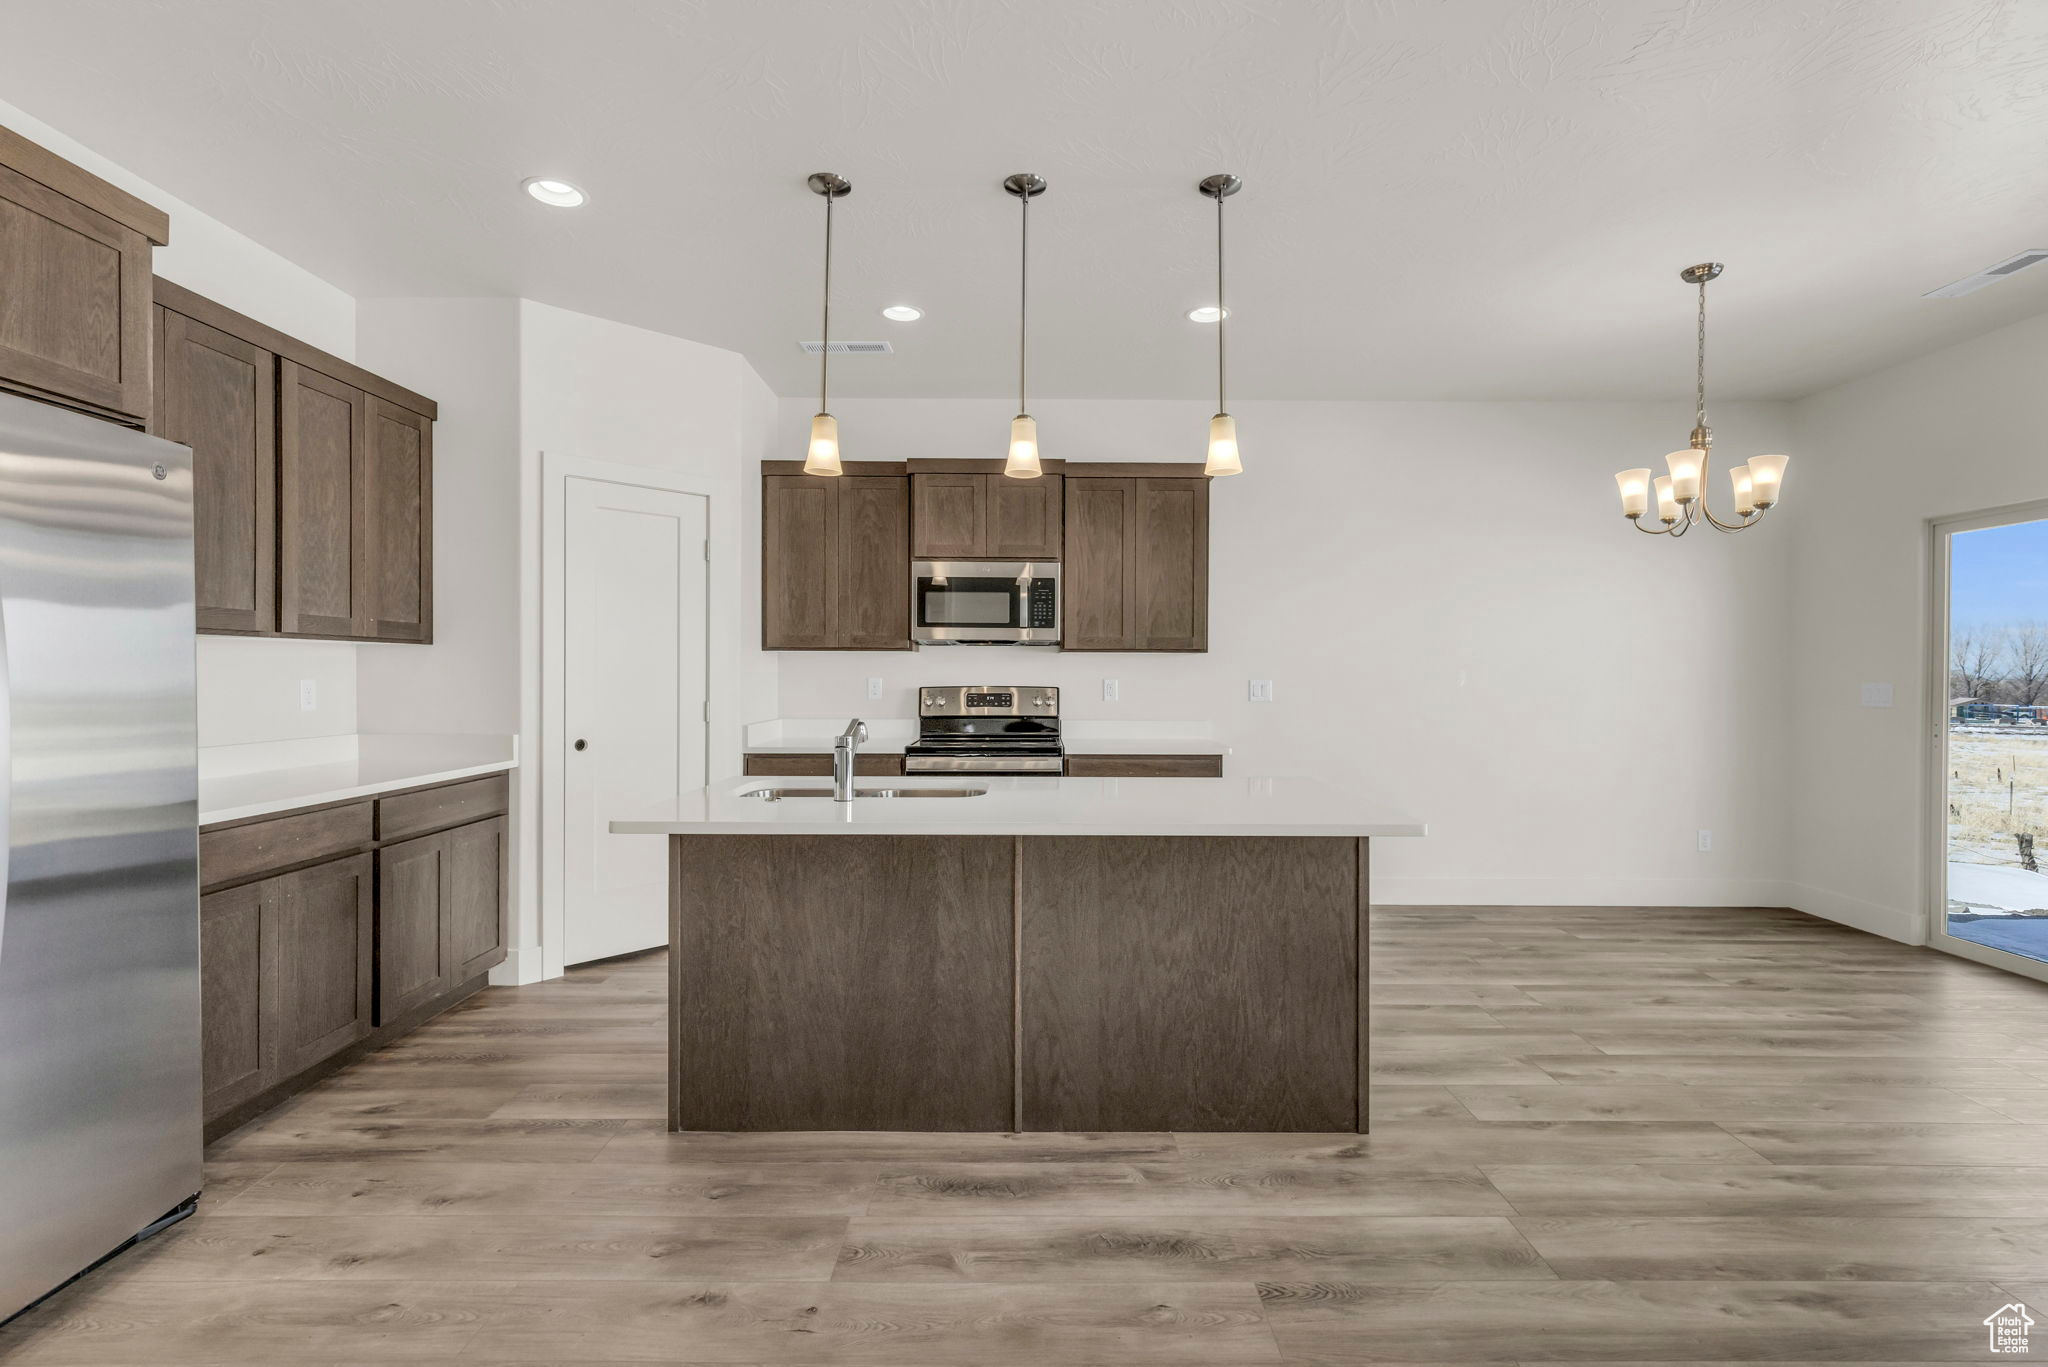 Kitchen featuring light hardwood / wood-style flooring, hanging light fixtures, an inviting chandelier, stainless steel appliances, and dark brown cabinetry